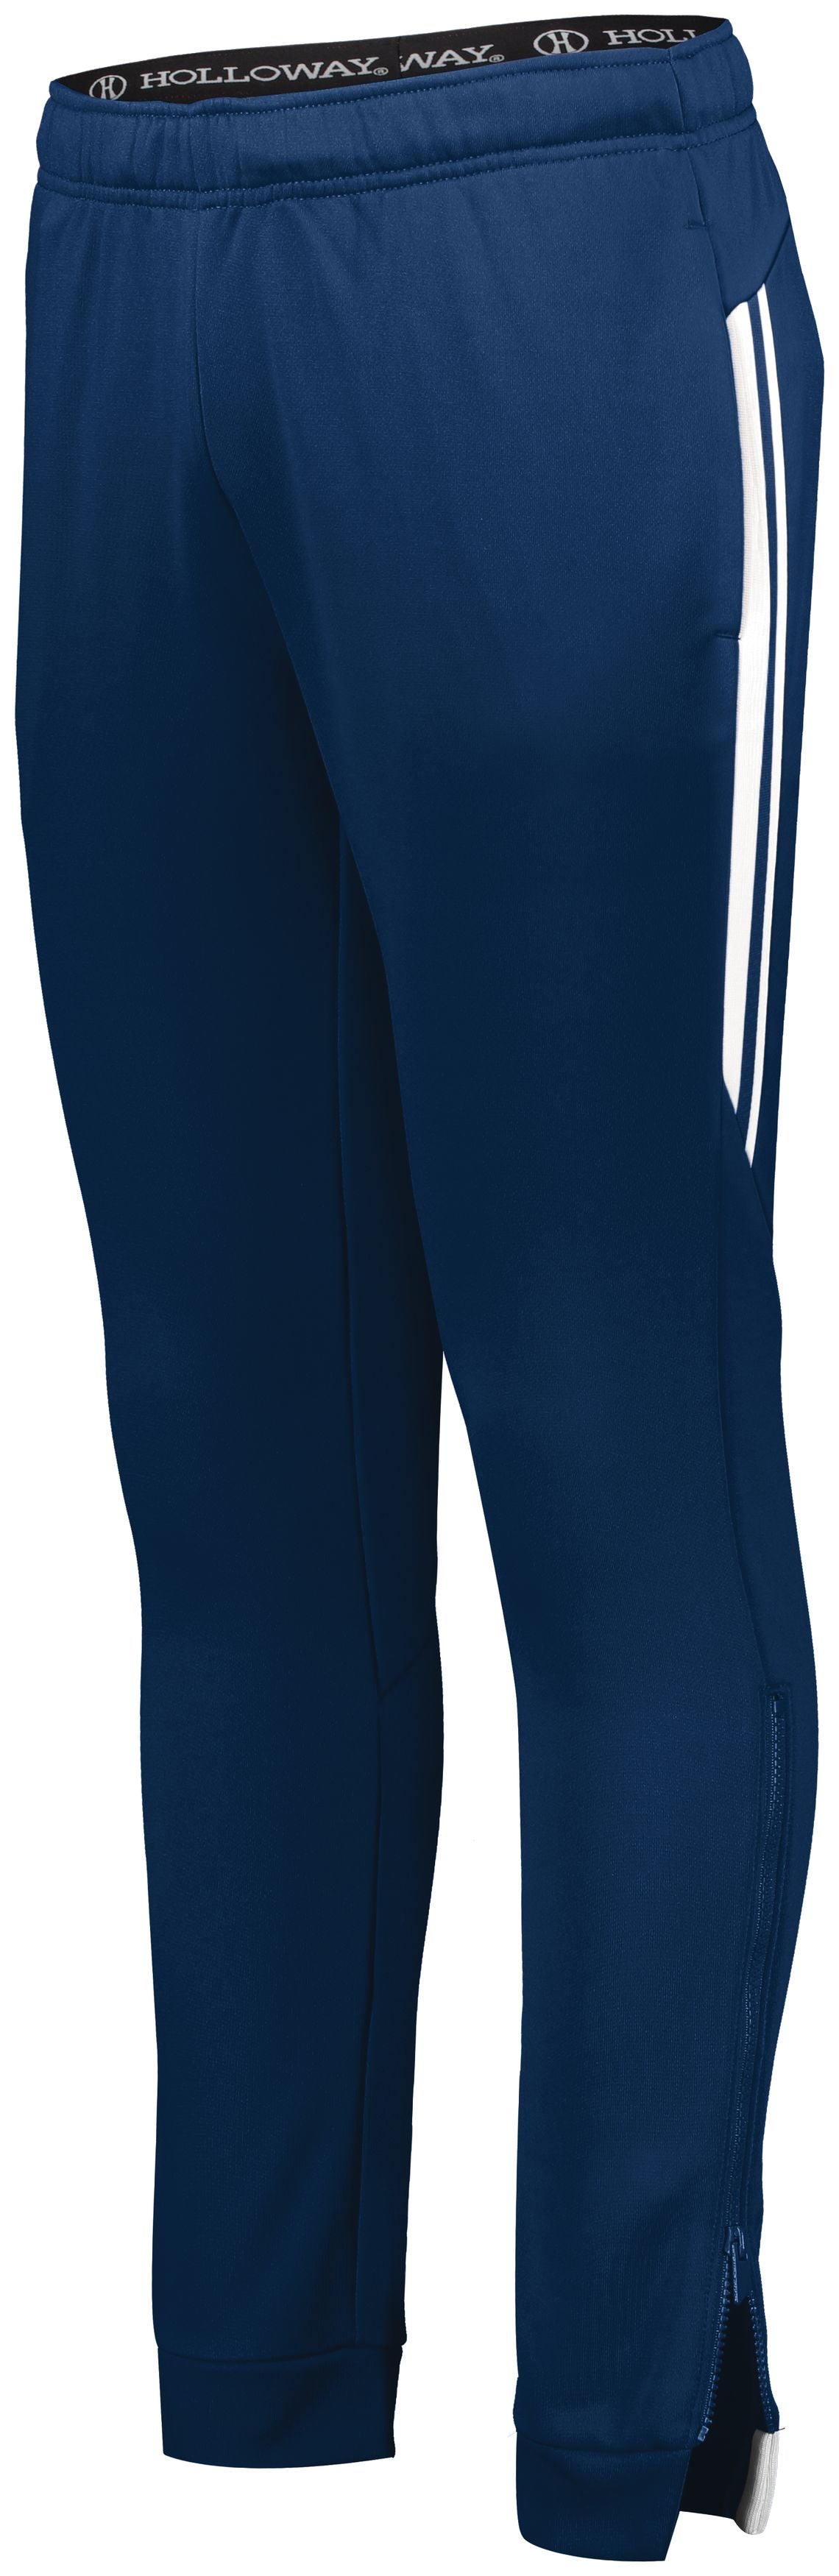 Holloway Ladies Retro Grade Pant in Navy/White  -Part of the Ladies, Ladies-Pants, Pants, Holloway product lines at KanaleyCreations.com